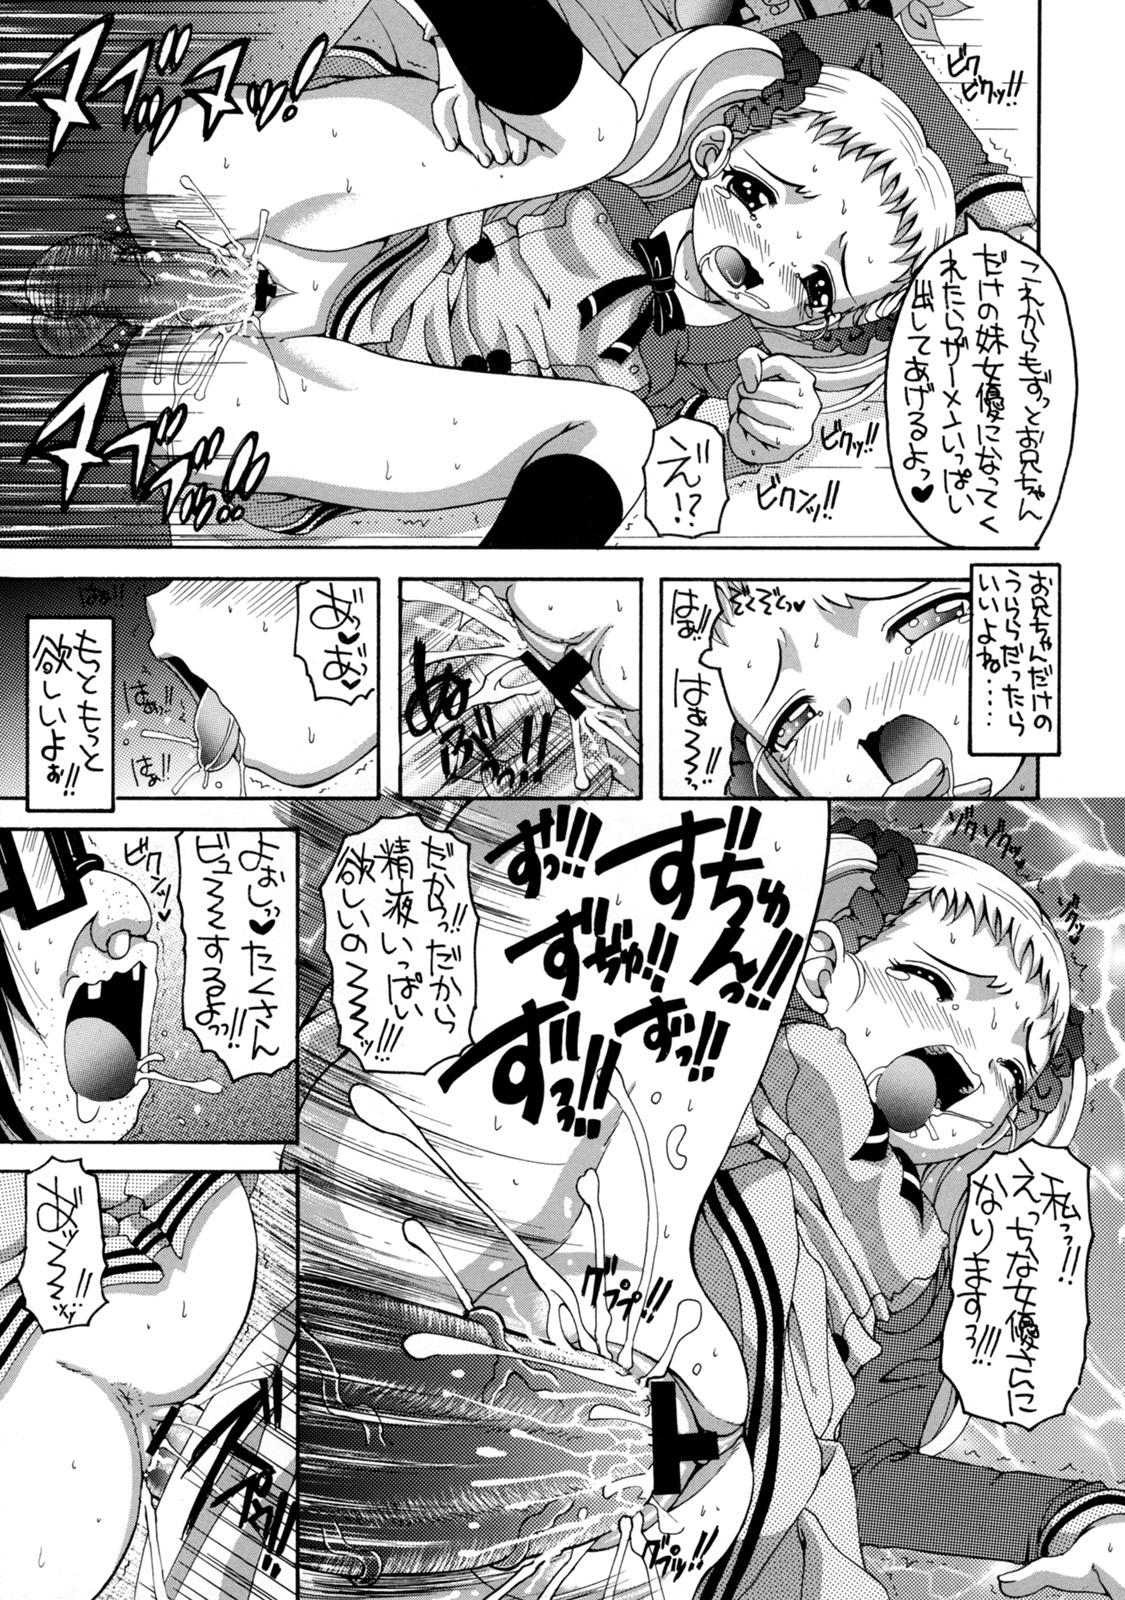 Seduction Porn Yes! Five 3 - Pretty cure Yes precure 5 Exotic - Page 12